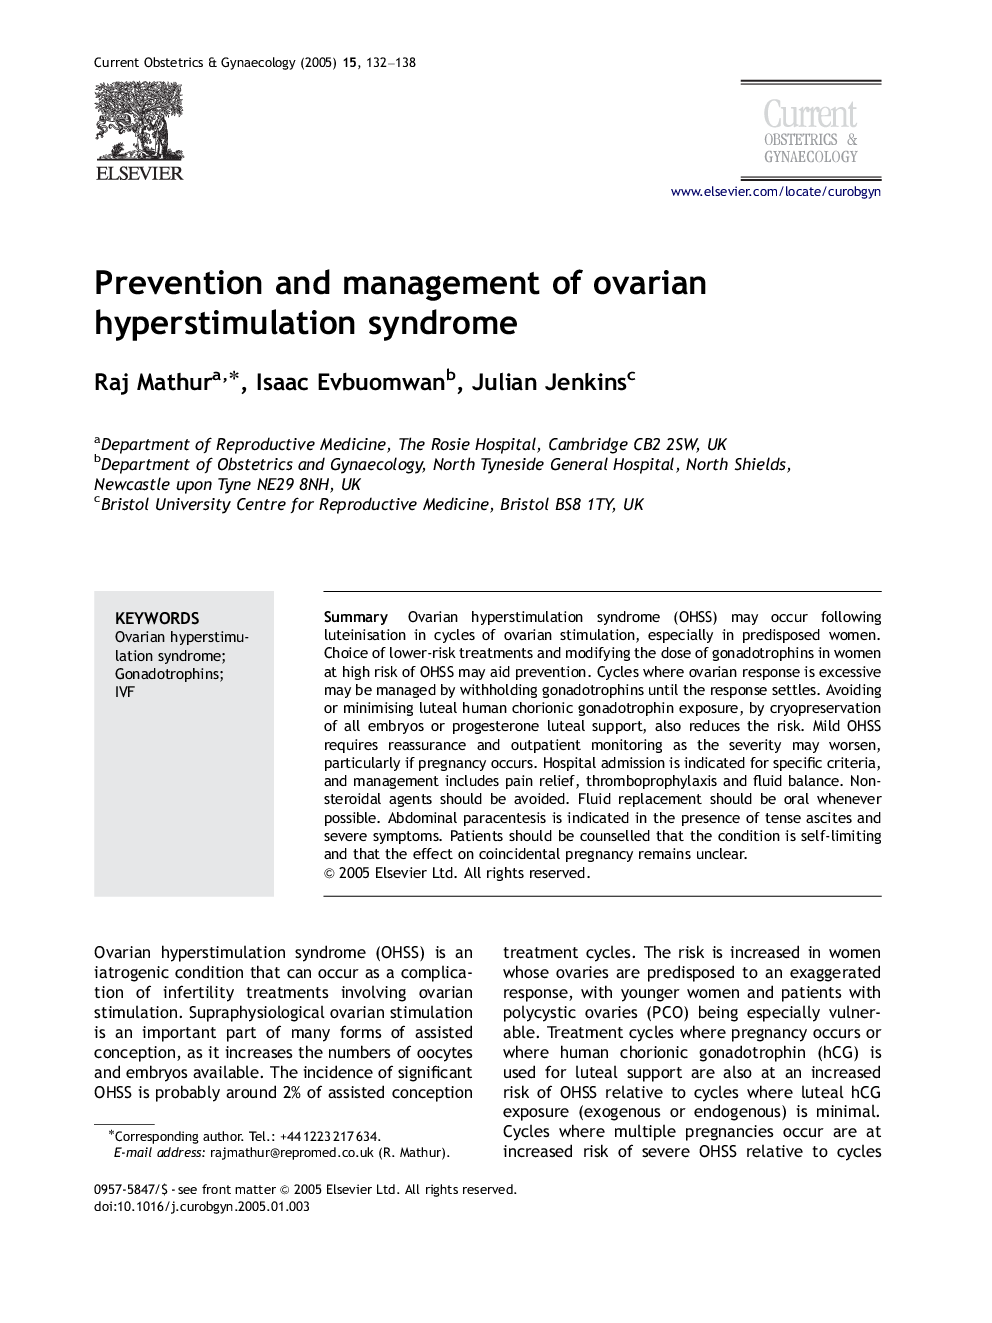 Prevention and management of ovarian hyperstimulation syndrome